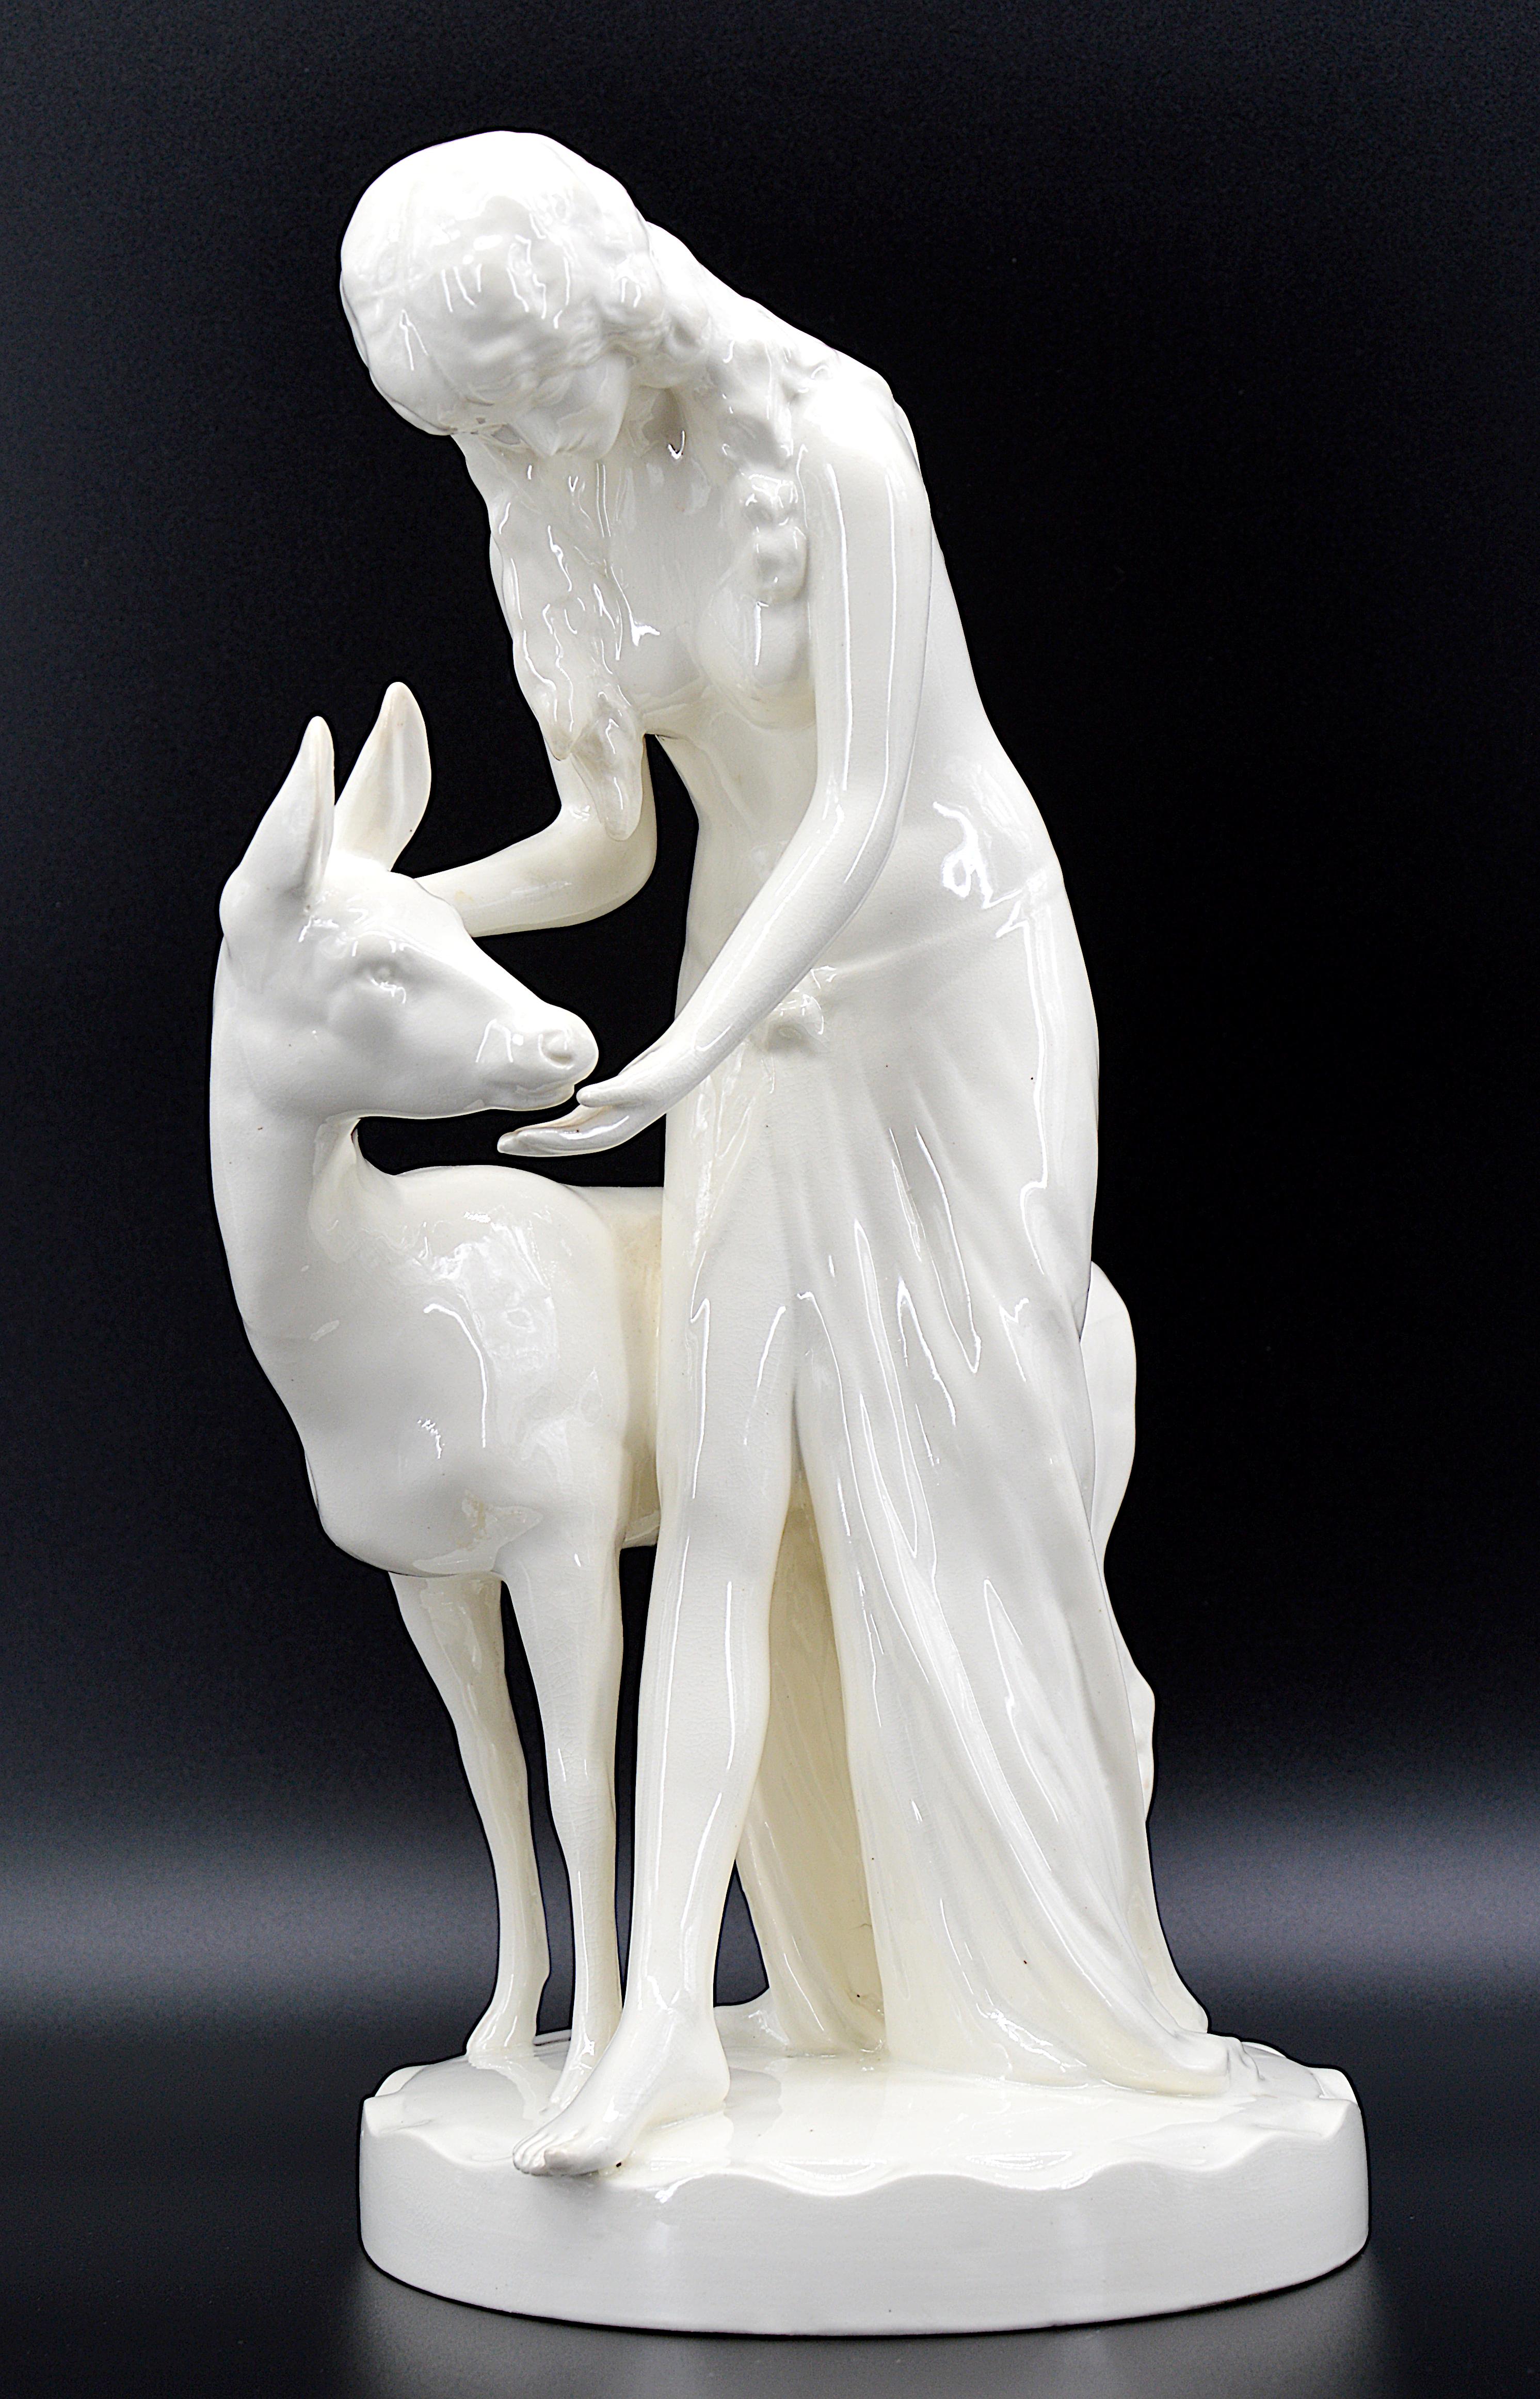 Large Art Deco - Art Nouveau group in glazed porcelain biscuit by Royal Dux, Bohemia, 1919-1925. The young lady and the fan. Measures: Height 15.75